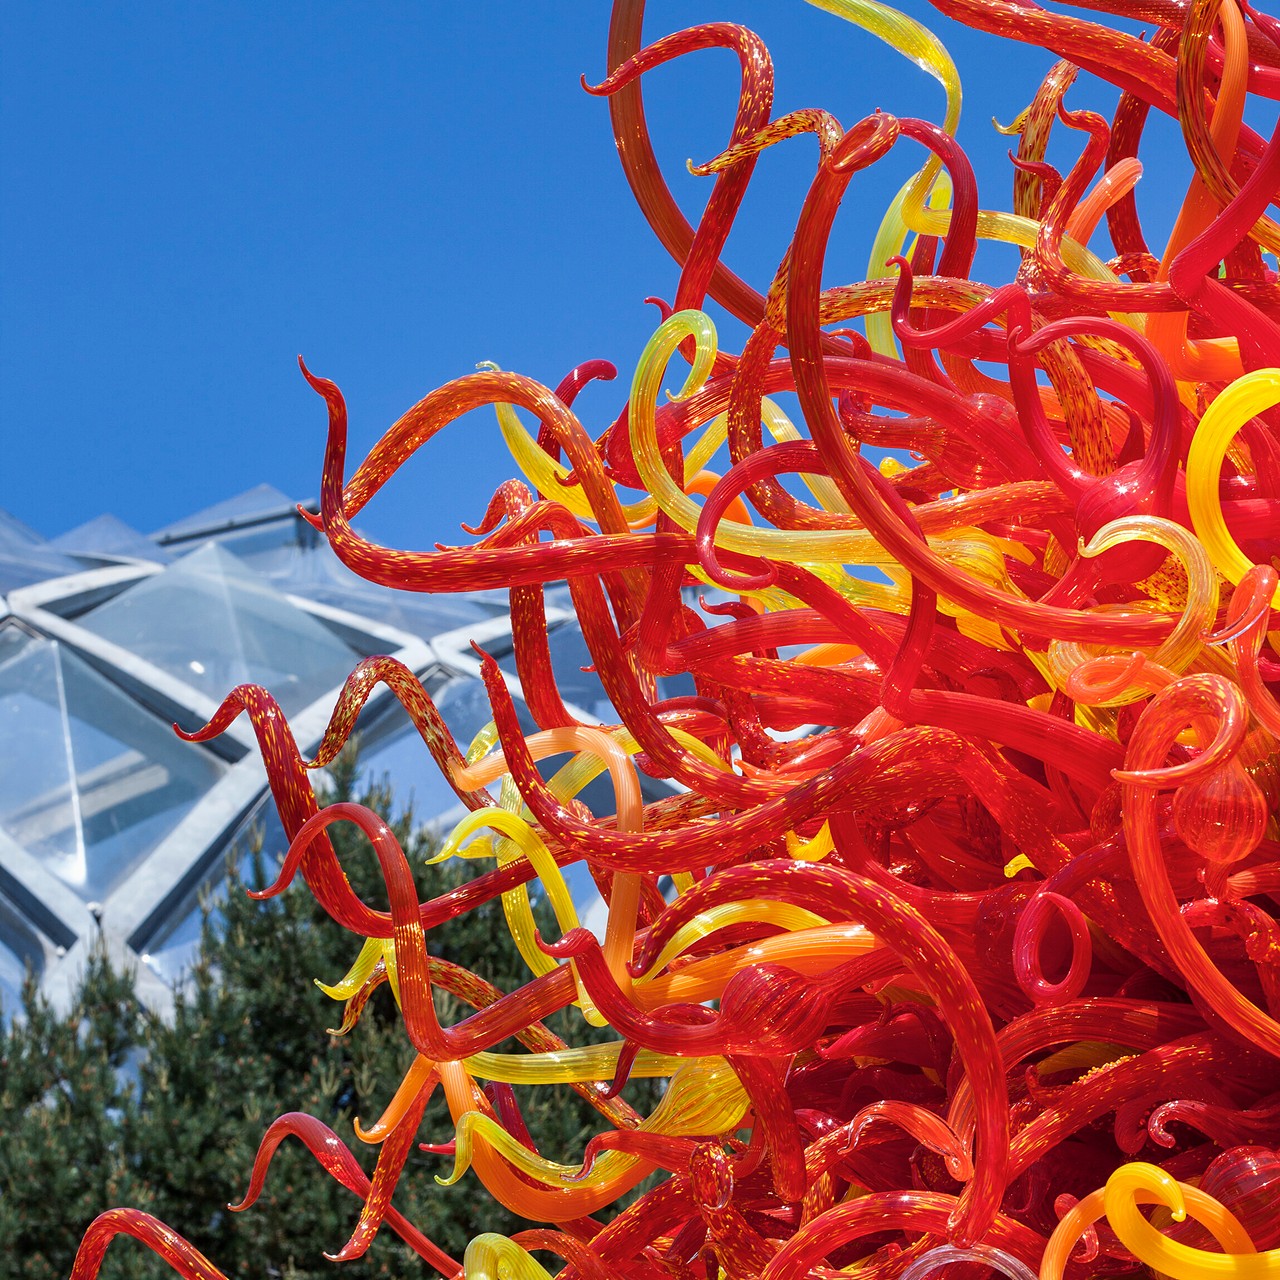 Dale Chihuly
Summer Sun (detail), 2010
12½ x 12½ x 12½'
Denver Botanic Gardens, installed 2014
© 2022 Chihuly Studio. All rights reserved.